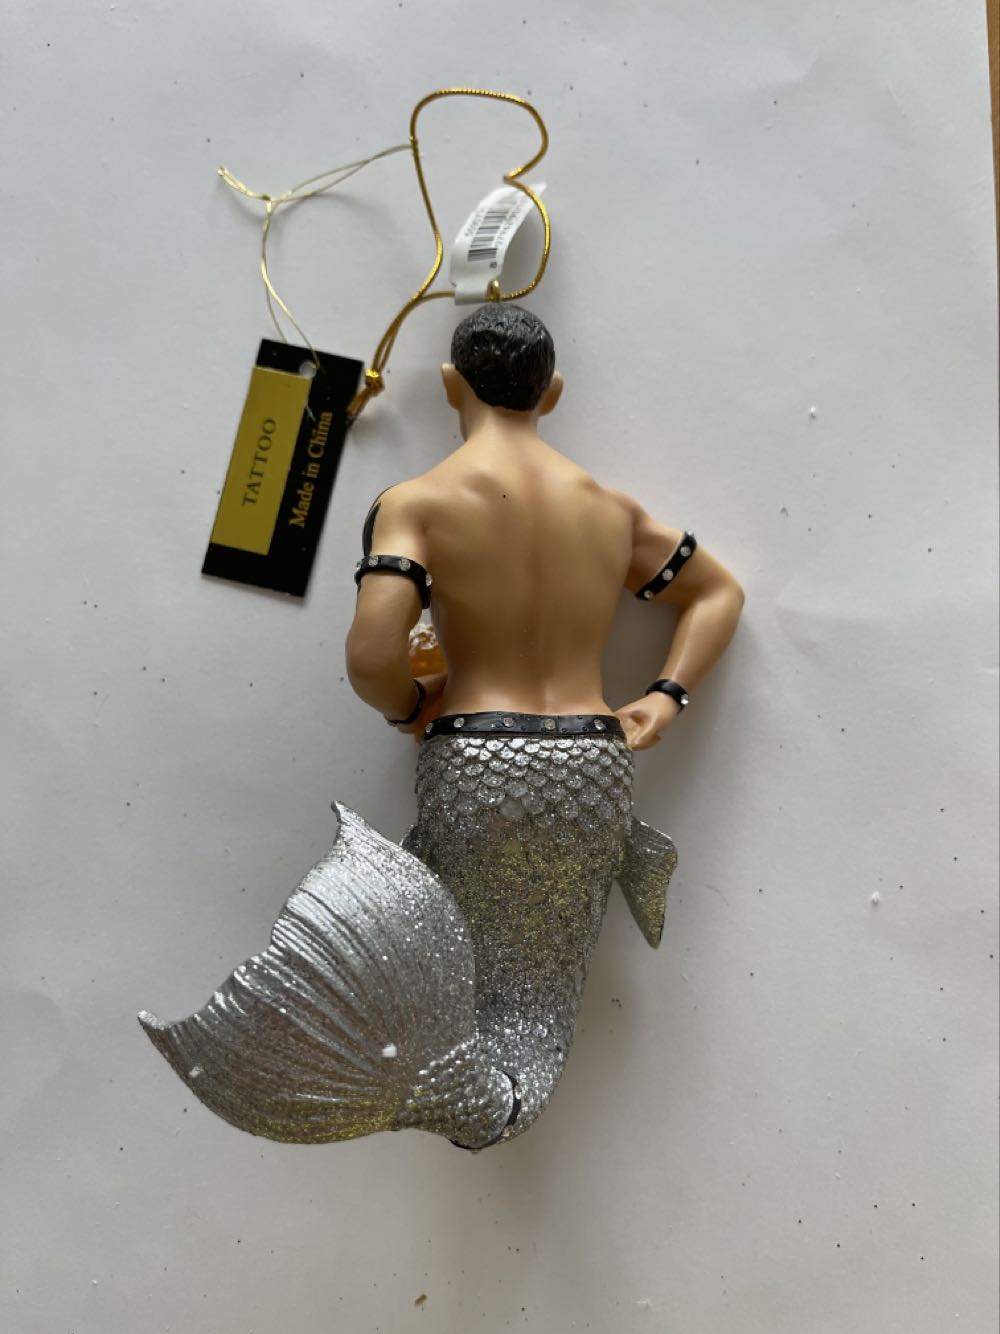 Tattoo Merman #55-50771 - It’s All About The Bling! (One World, One Ocean, Let’s Protect It!) ornament collectible [Barcode 807962907718] - Main Image 2